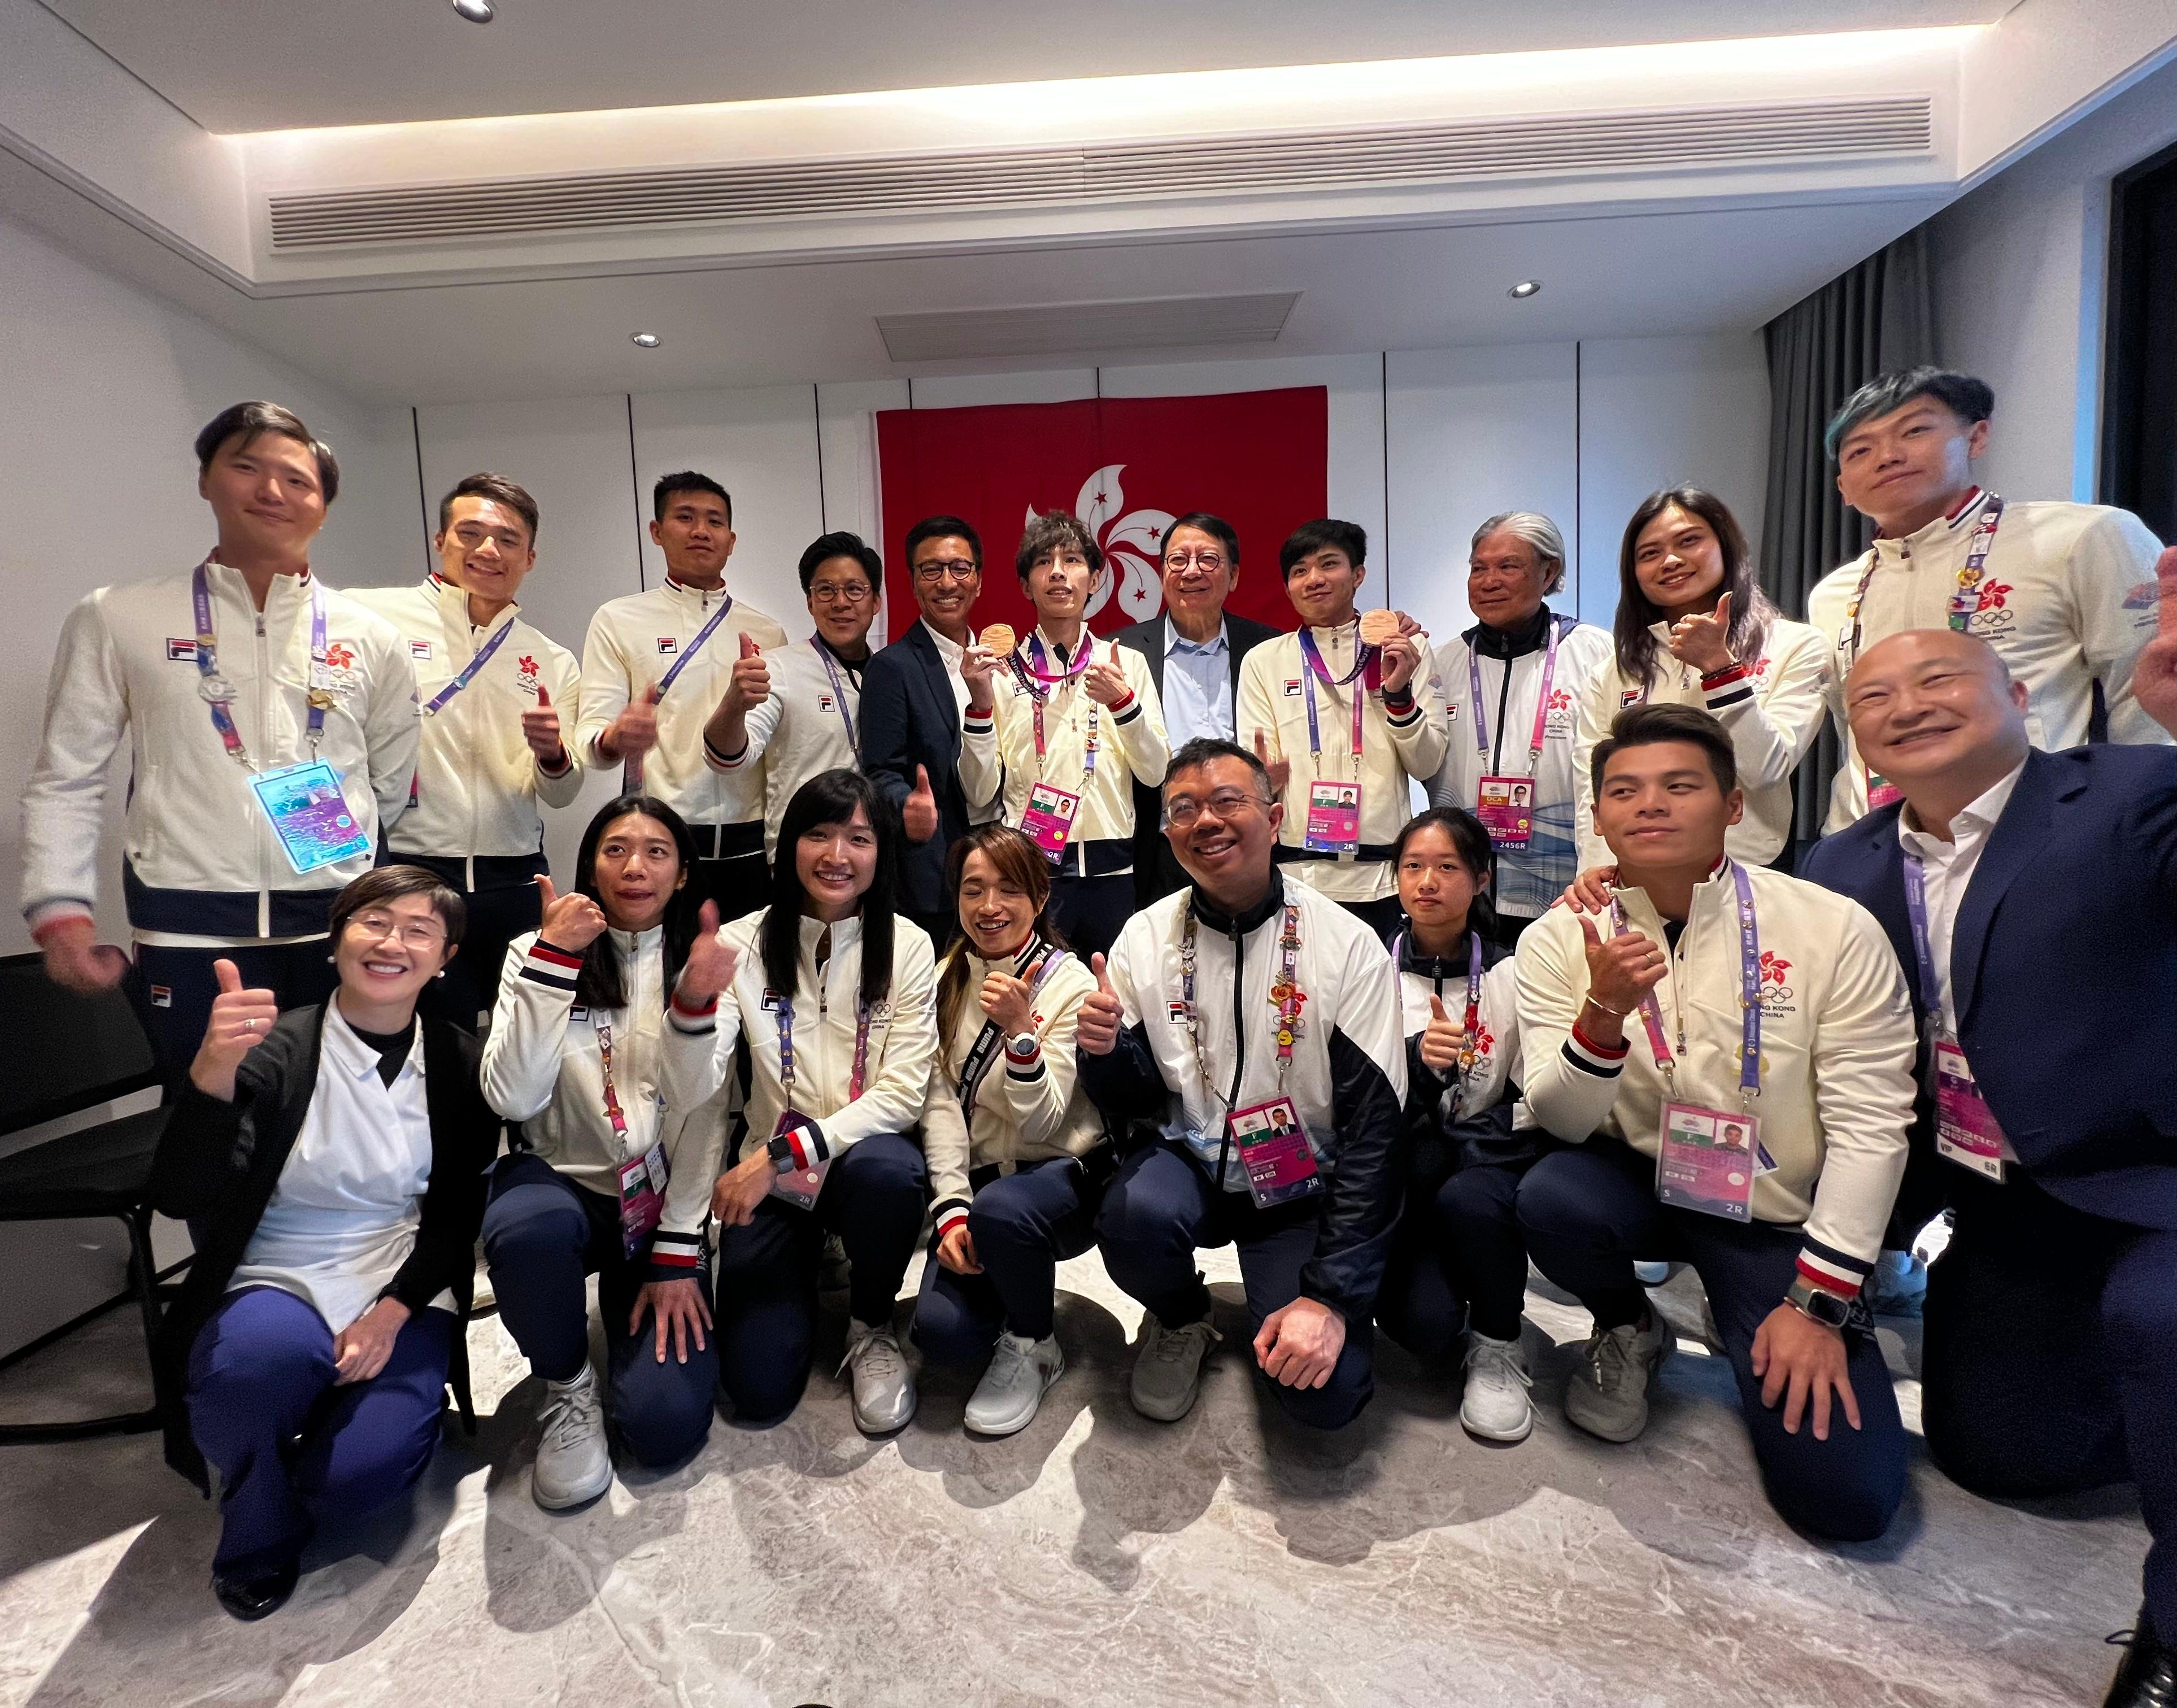 The Chief Secretary for Administration, Mr Chan Kwok-ki, attended the Closing Ceremony of the 19th Asian Games in Hangzhou today (October 8) and beforehand visited the athletes' village of the Asian Games. Photo shows Mr Chan (back row, fifth right); the Commissioner for Sports in the Culture, Sports and Tourism Bureau, Mr Sam Wong (back row, fifth left); the President of the Sports Federation & Olympic Committee of Hong Kong, China, Mr Timothy Fok (back row, third right); and the Chef de Mission of the Hong Kong, China Delegation to the Asian Games, Mr Kenneth Fok (back row, fourth left), with Hong Kong athletes in the village.